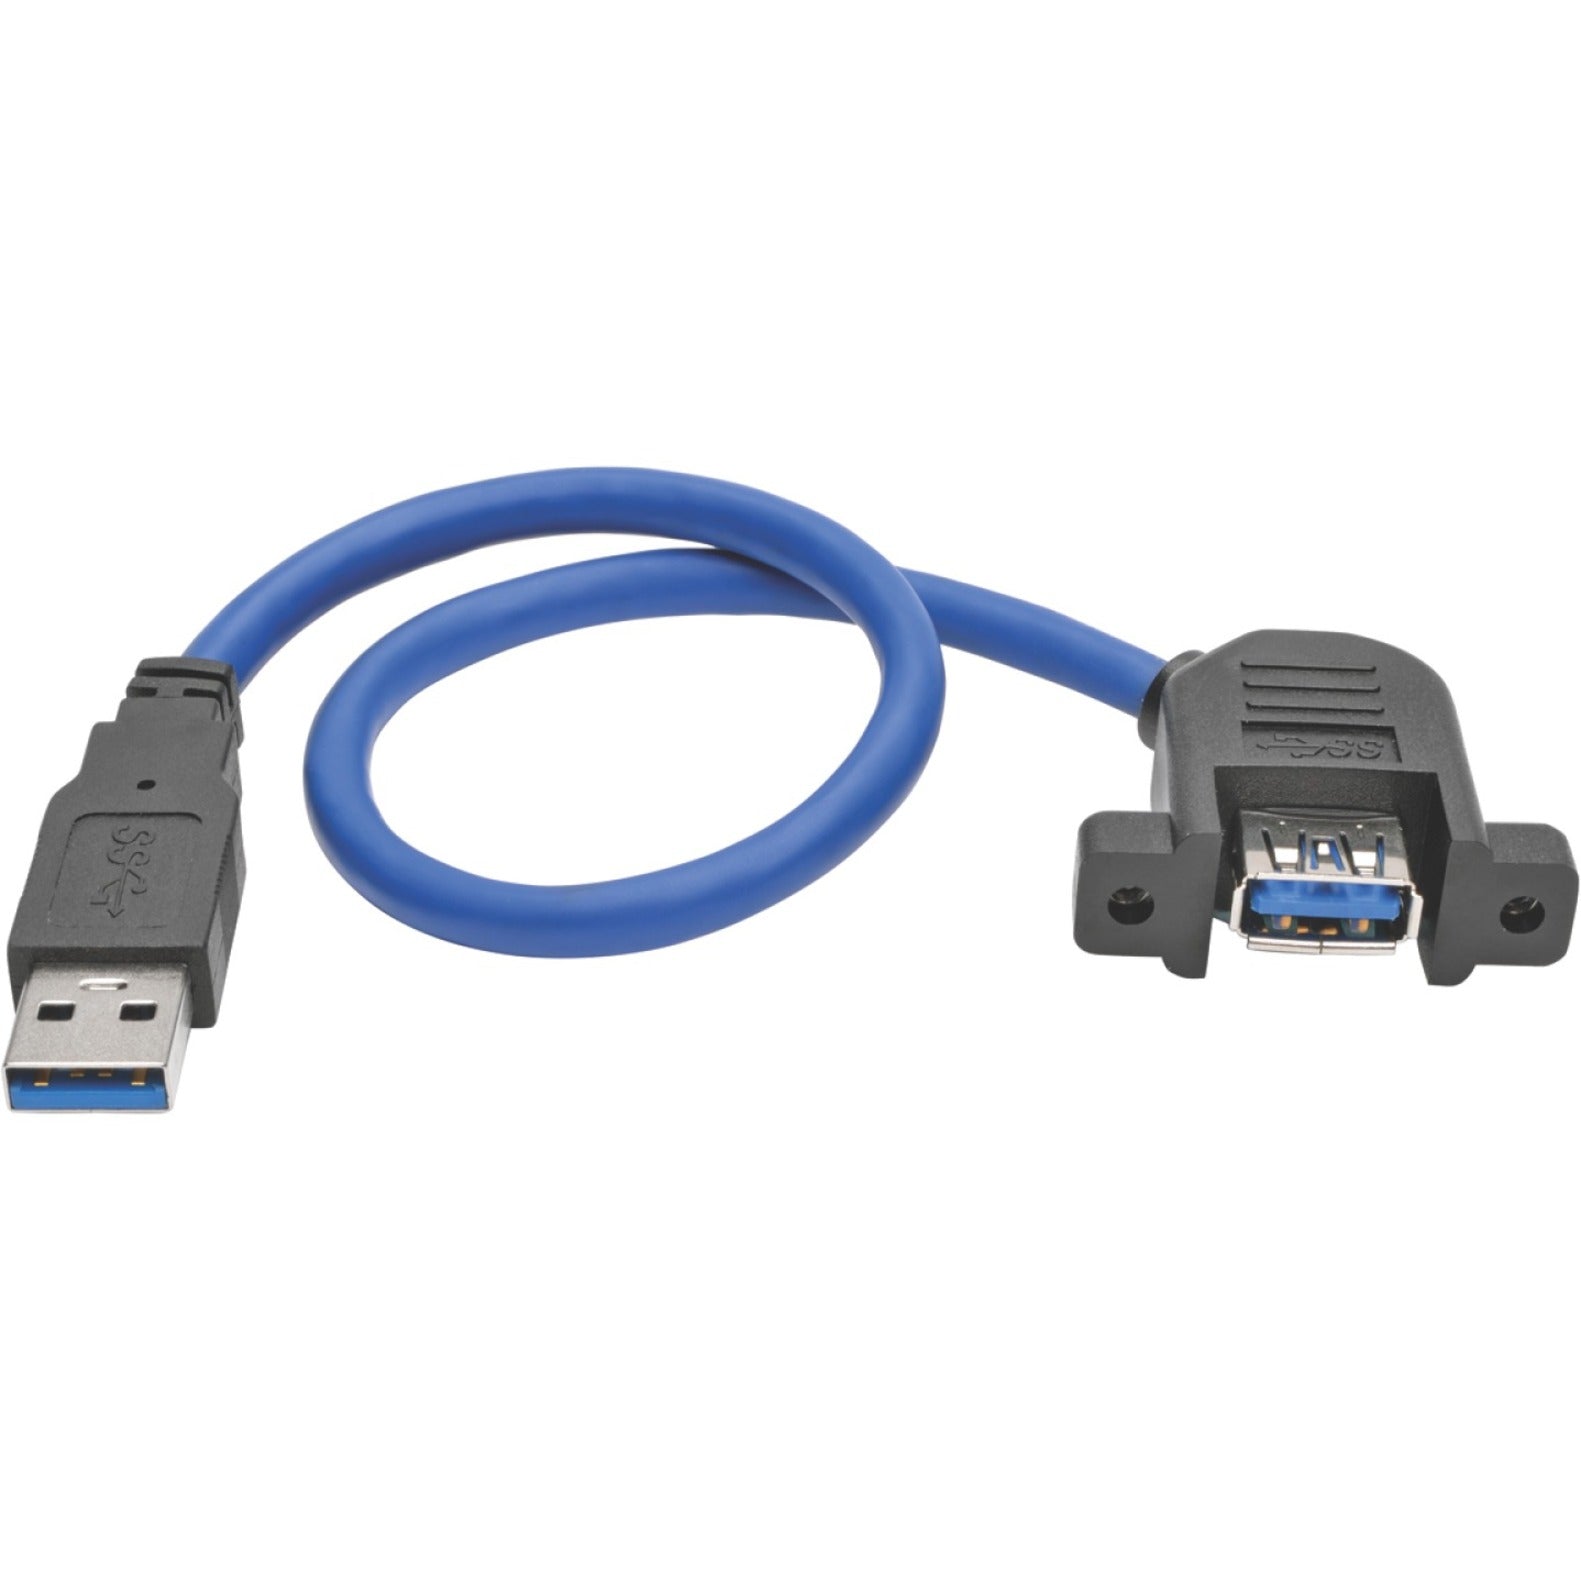 Tripp Lite U324-001-APM USB 3.0 SuperSpeed Panel-Mount Type-A Extension Cable (M/F) 1 ft Gold-Plated Connectors Rugged and Reliable  Tripp Lite U324-001-APM USB 3.0 초고속 패널 마운트 타입-A 연장 케이블 (남/여) 1 ft 금 도금 커넥터 견고하고 신뢰할 수 있는